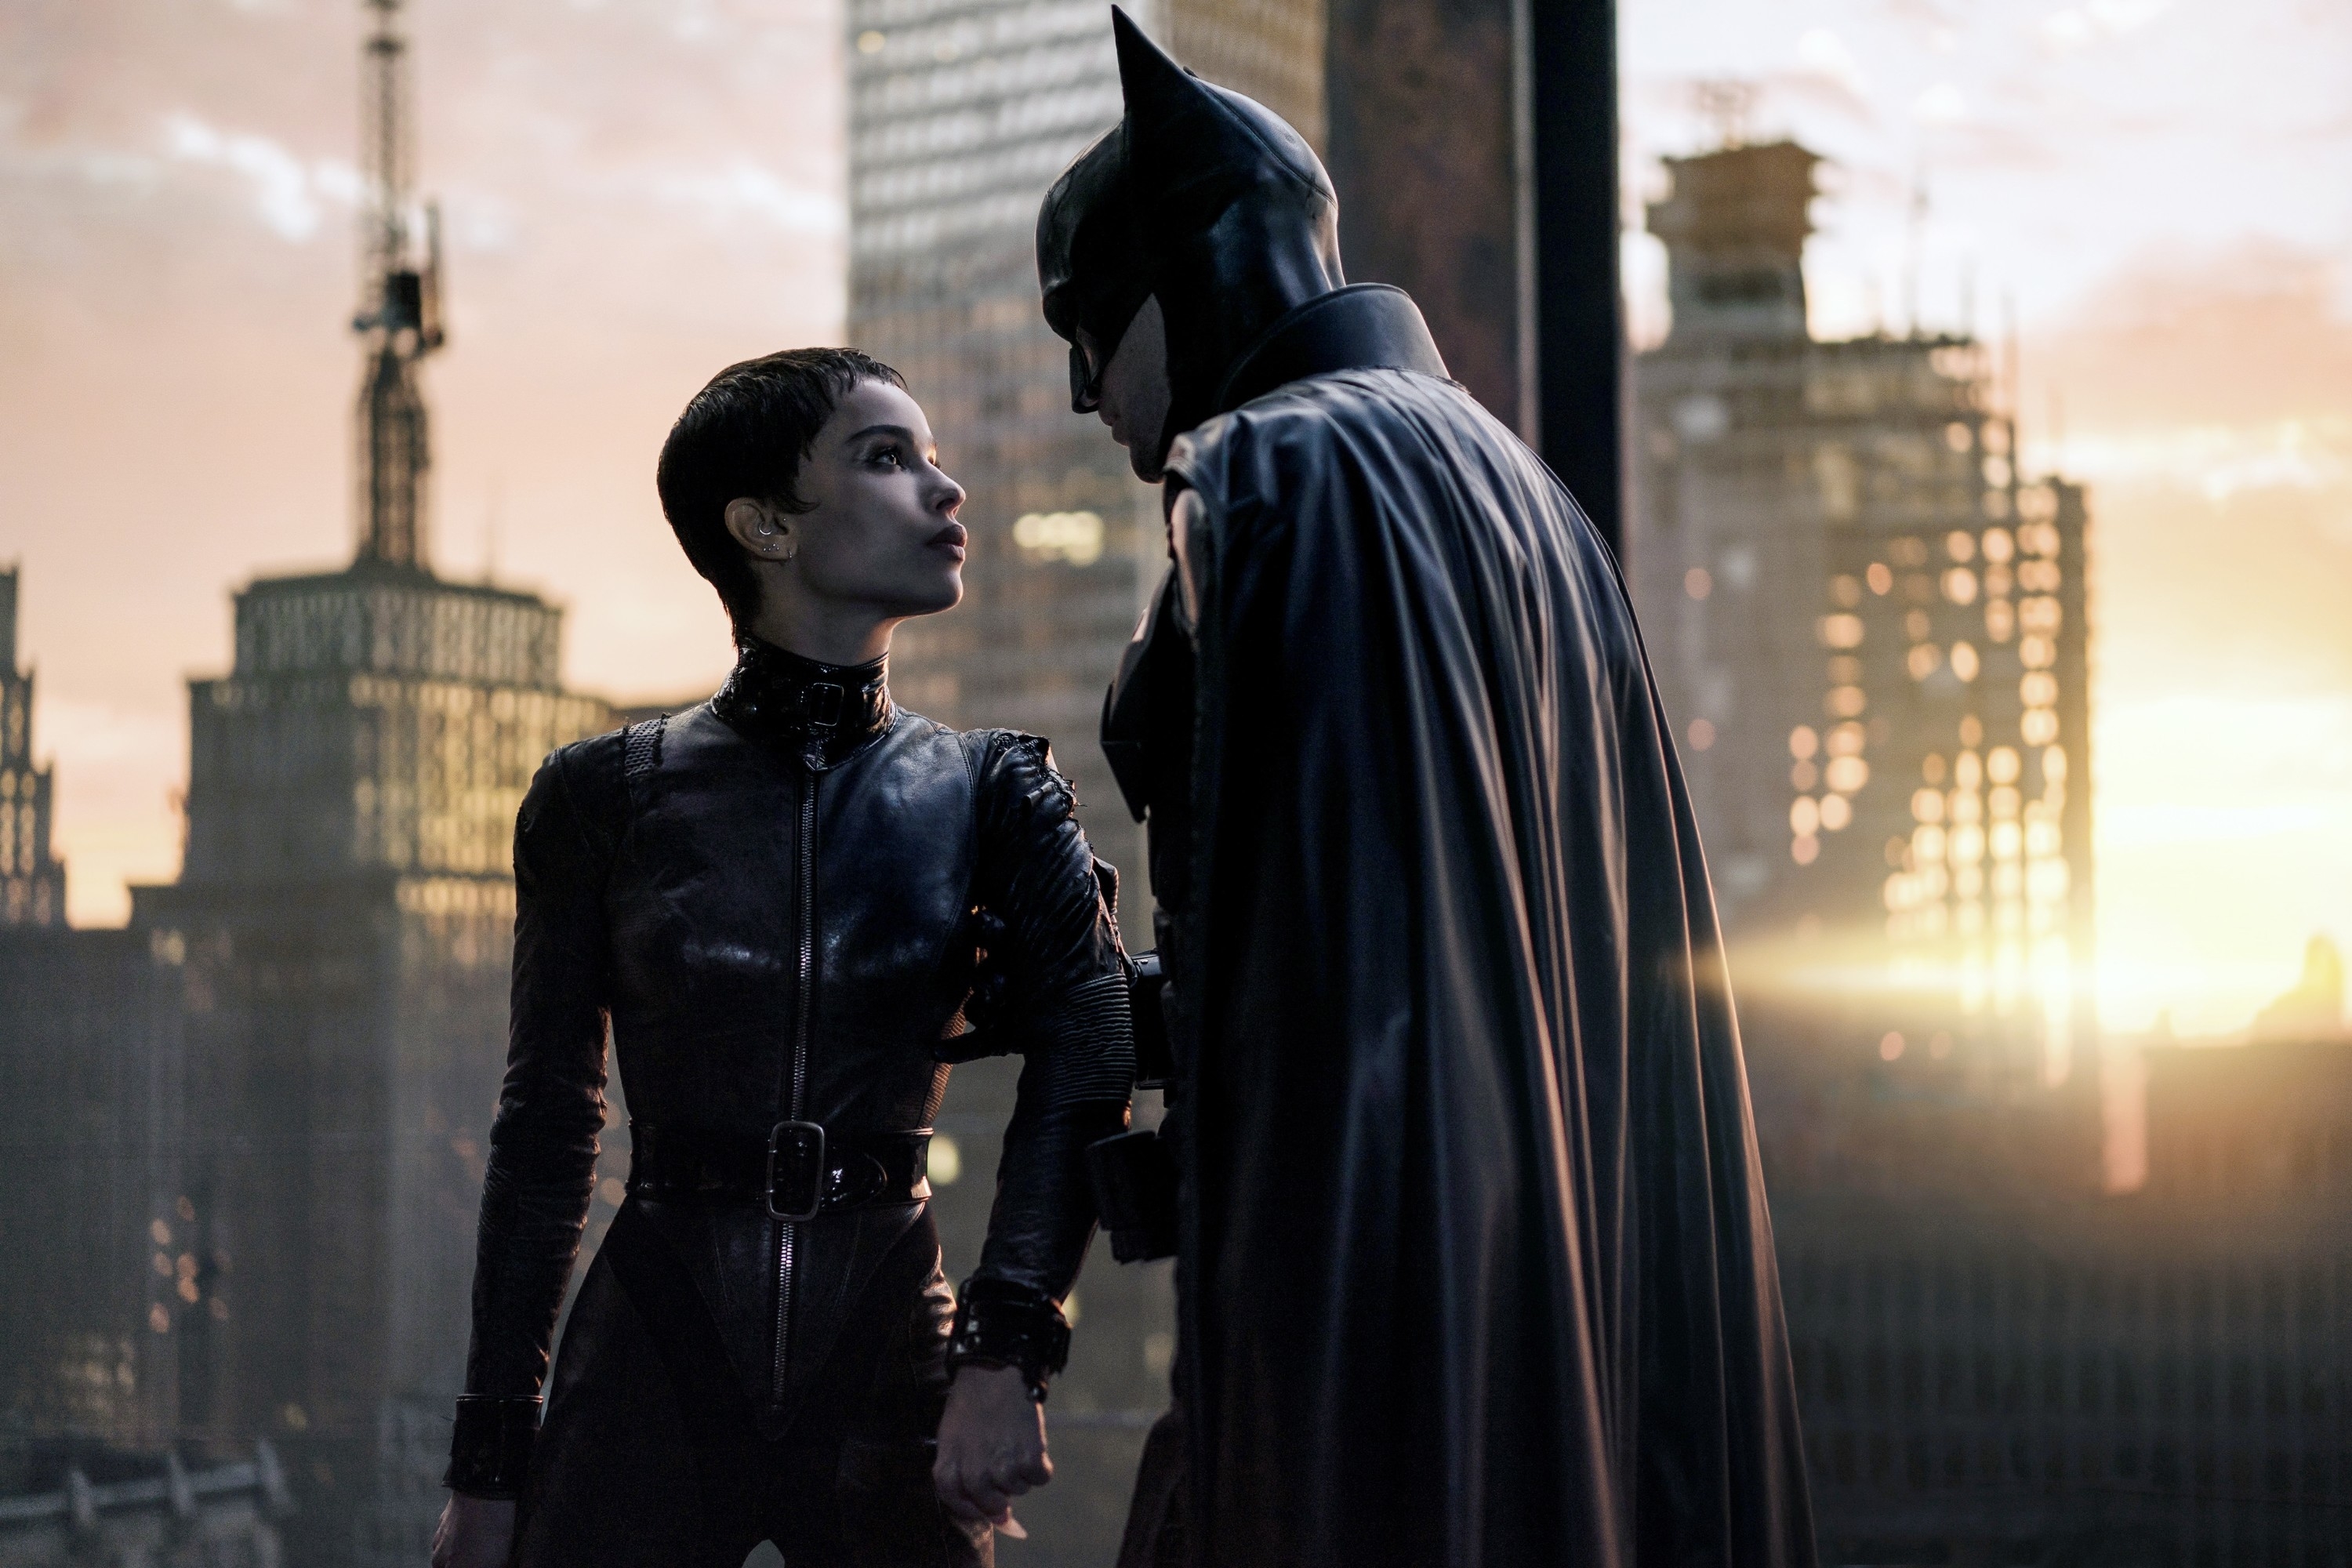 Catwoman and Batman close together against a city skyline at dusk